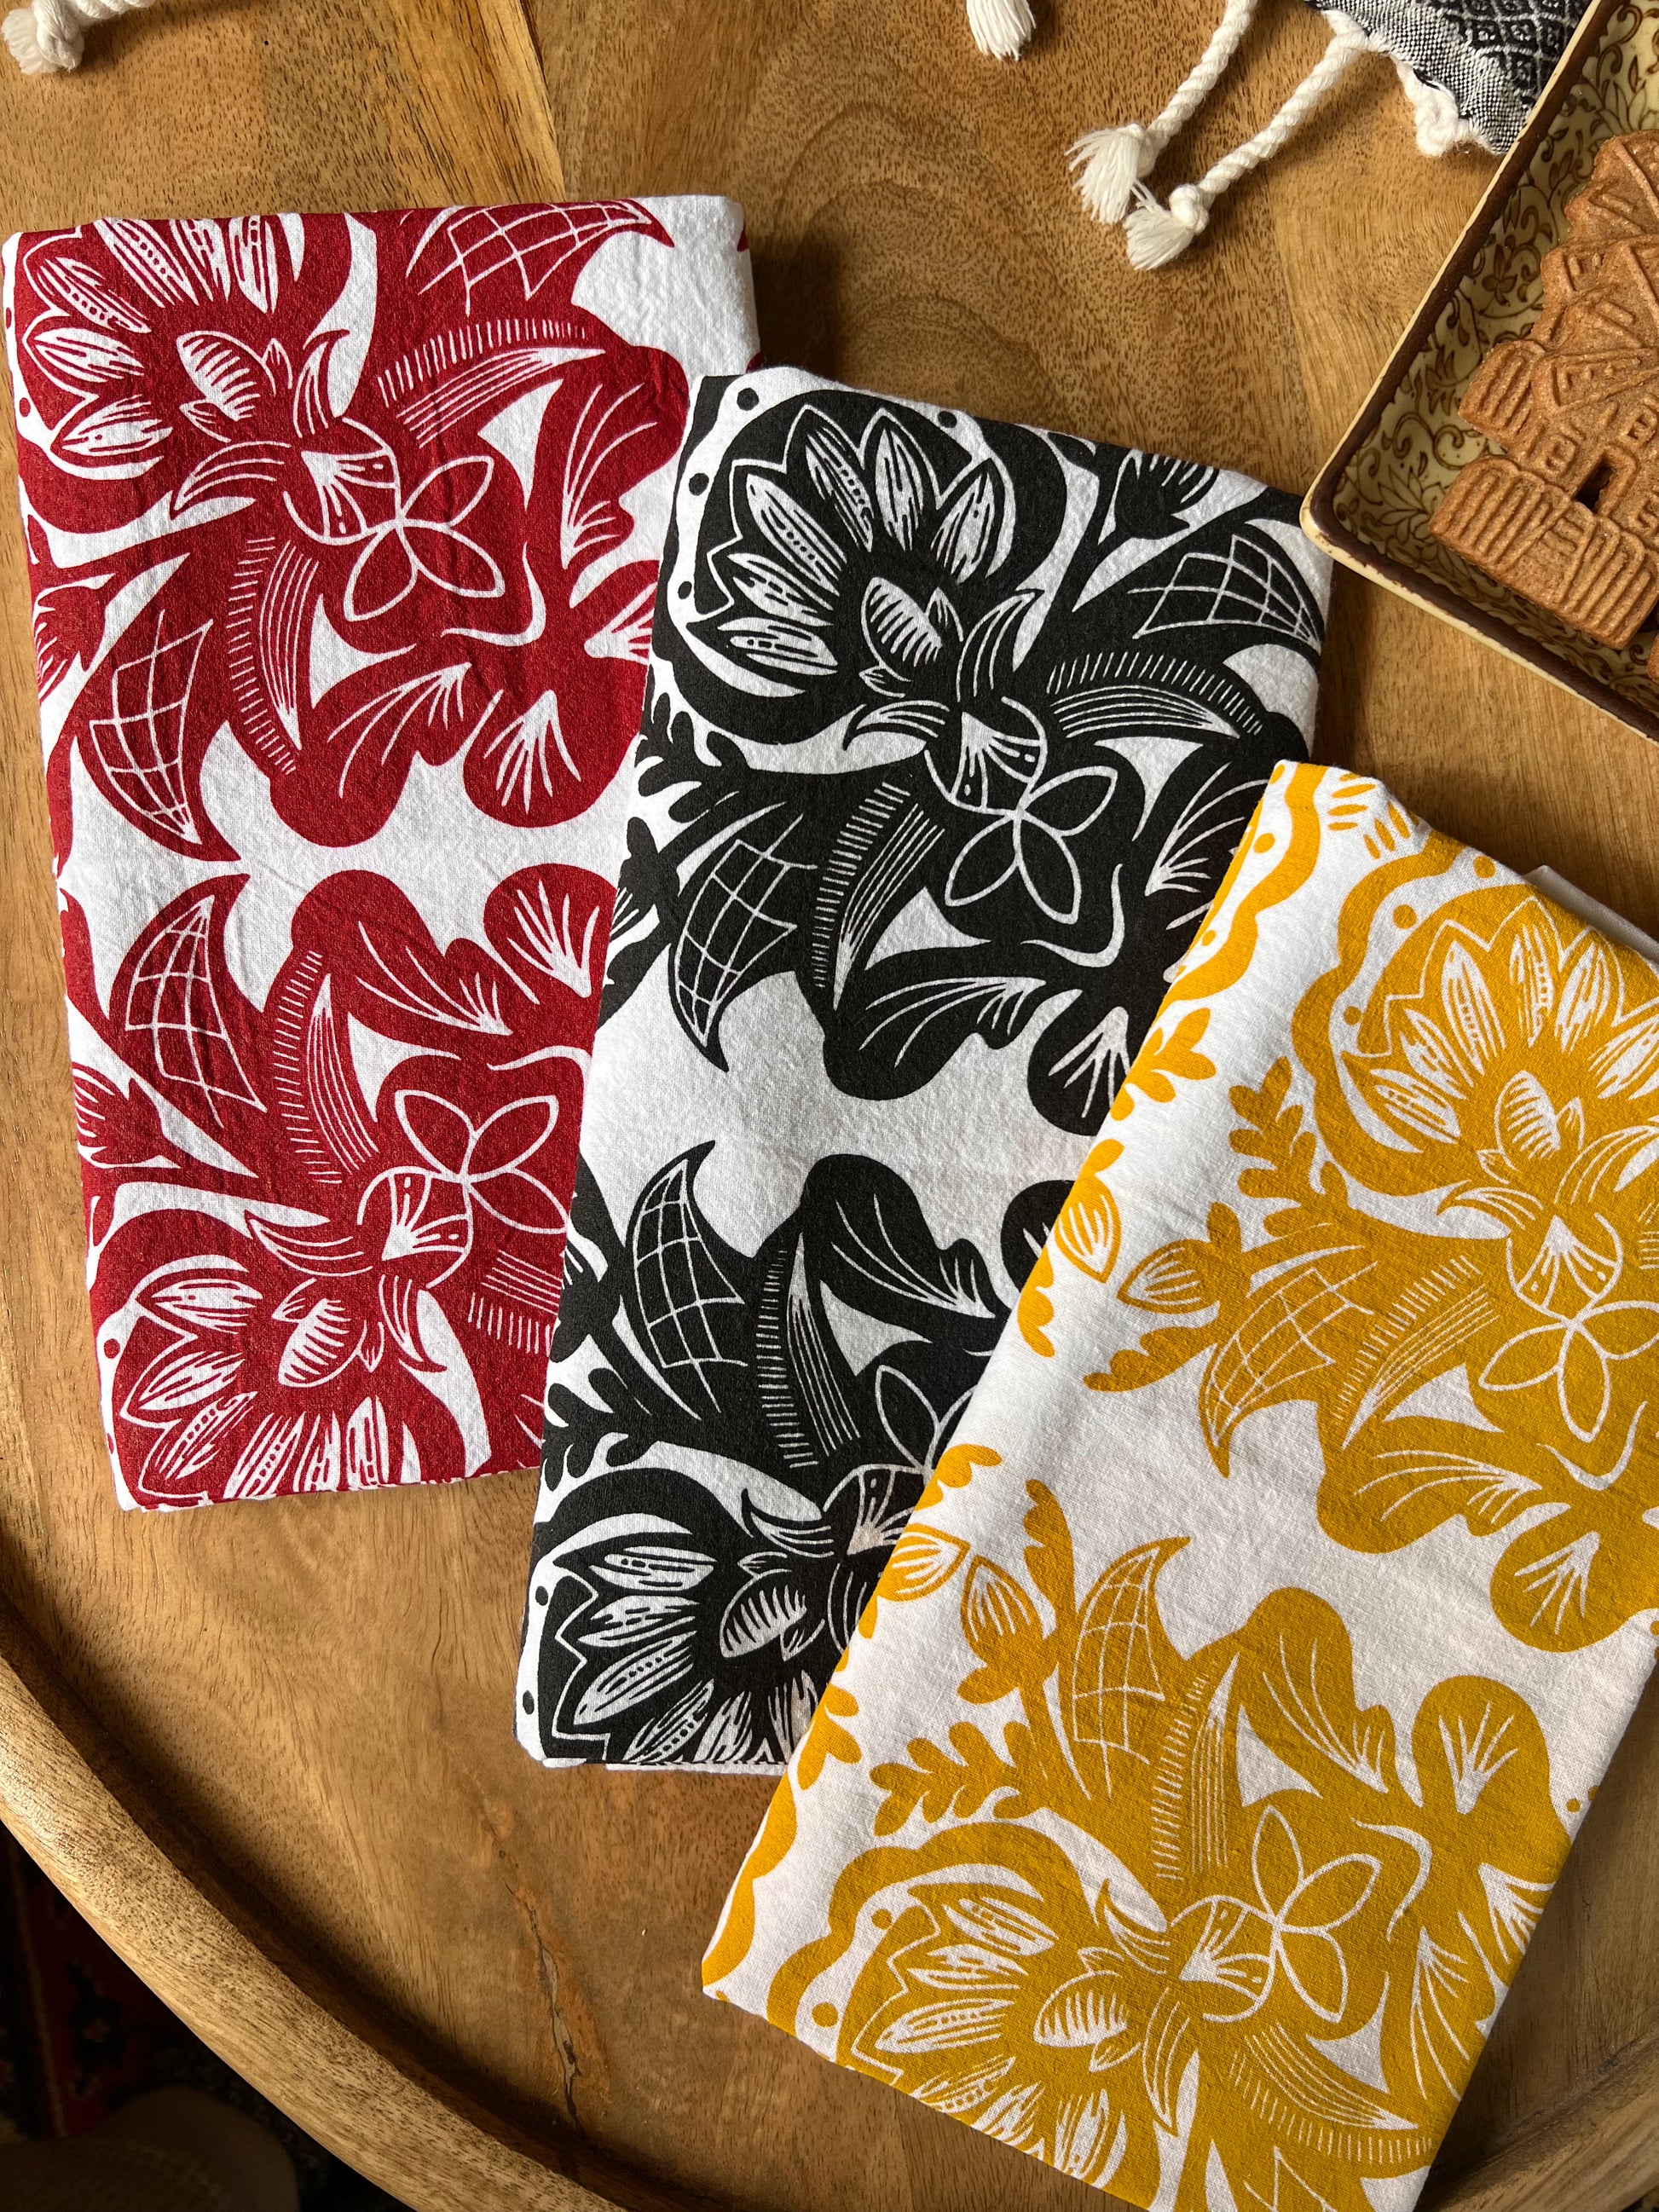 Cotton Twill Floral Kitchen Towels - Set of 2